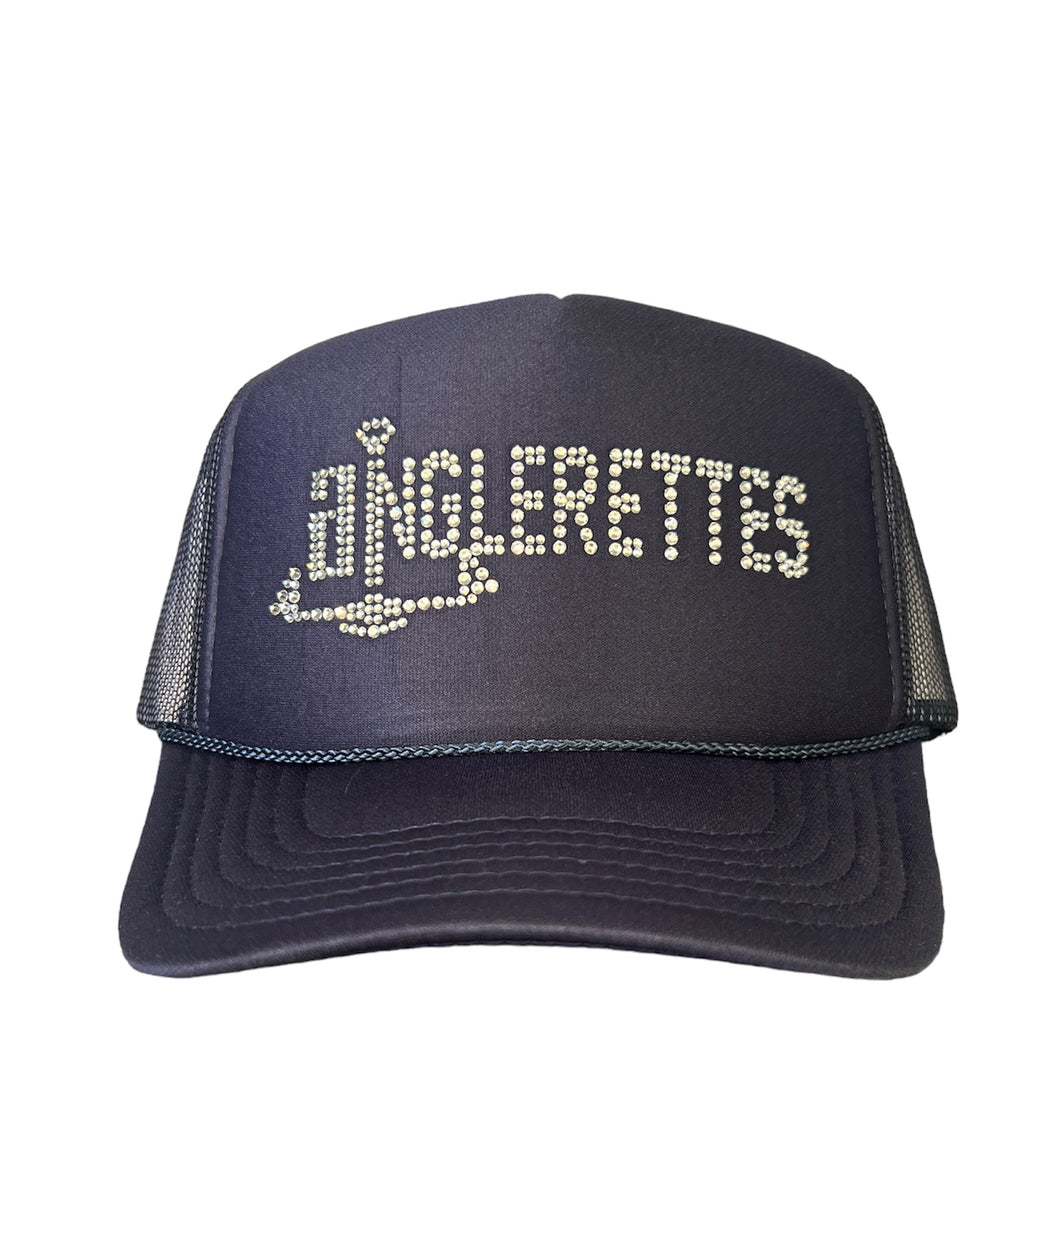 Adults Anglerettes Bling Hats Navy Blue